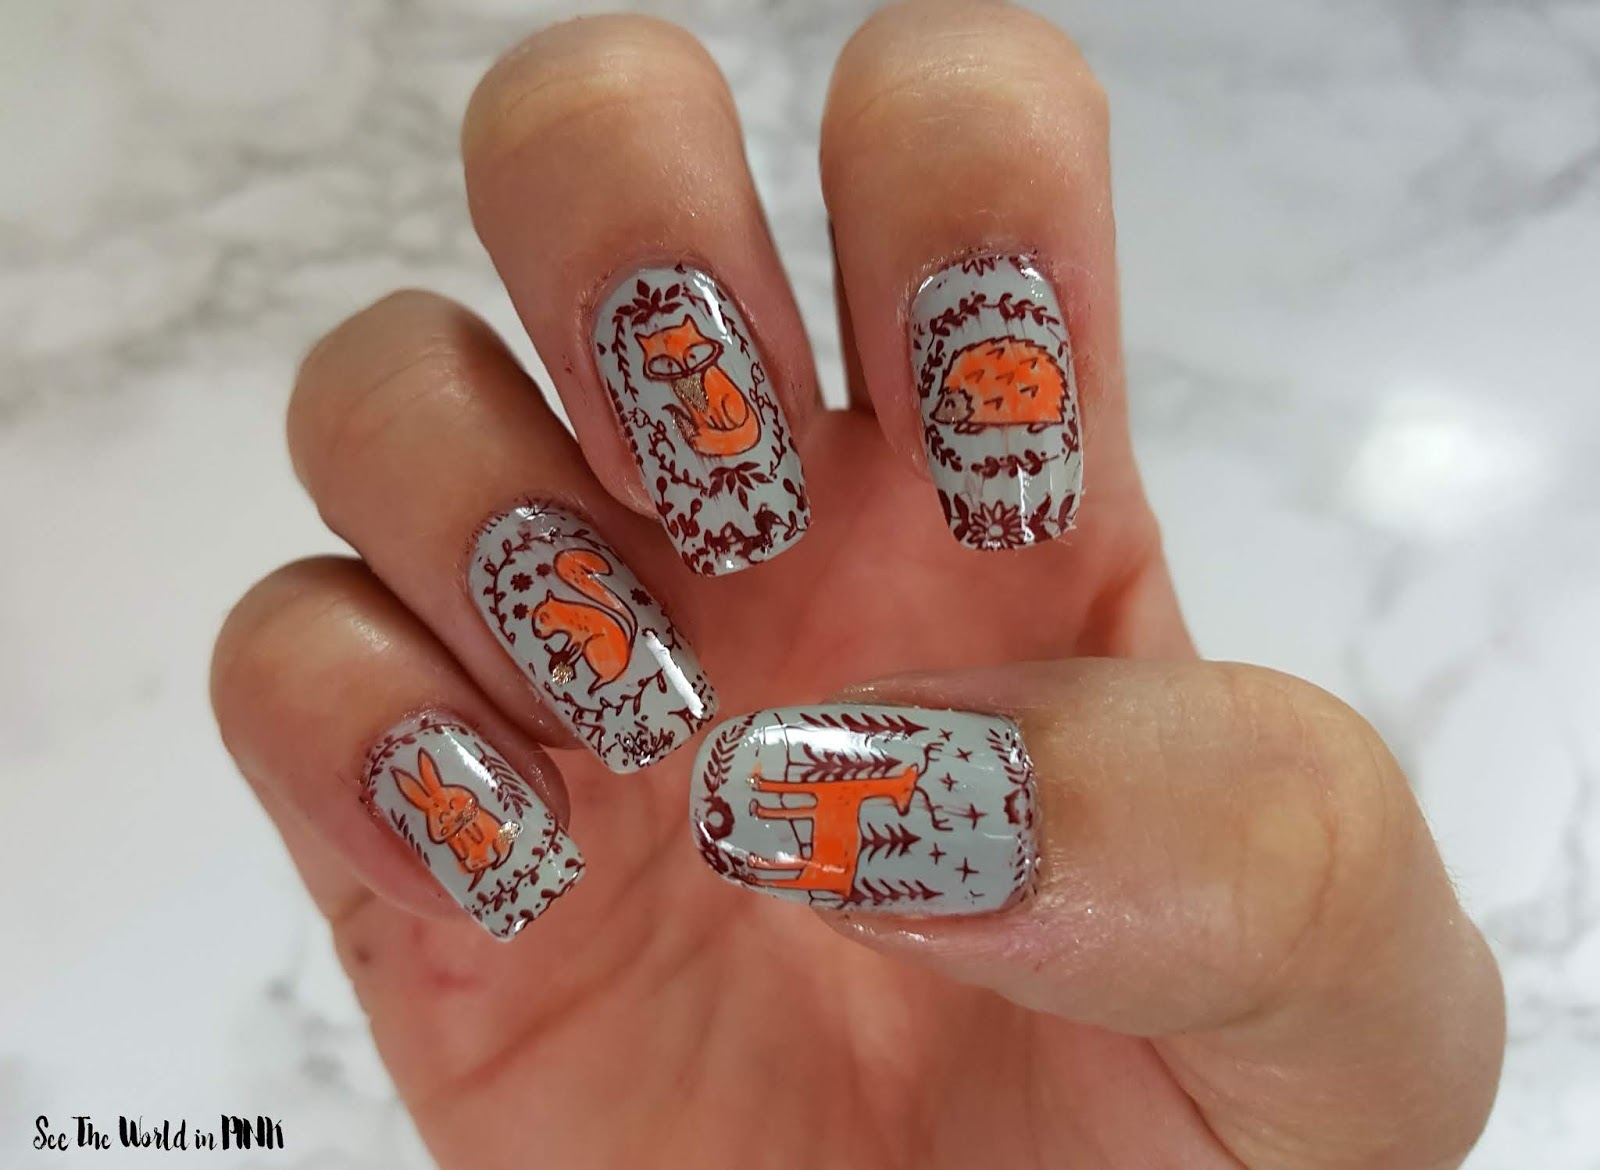 Manicure Monday - Fall Forest Friends Stamped Nail Art 